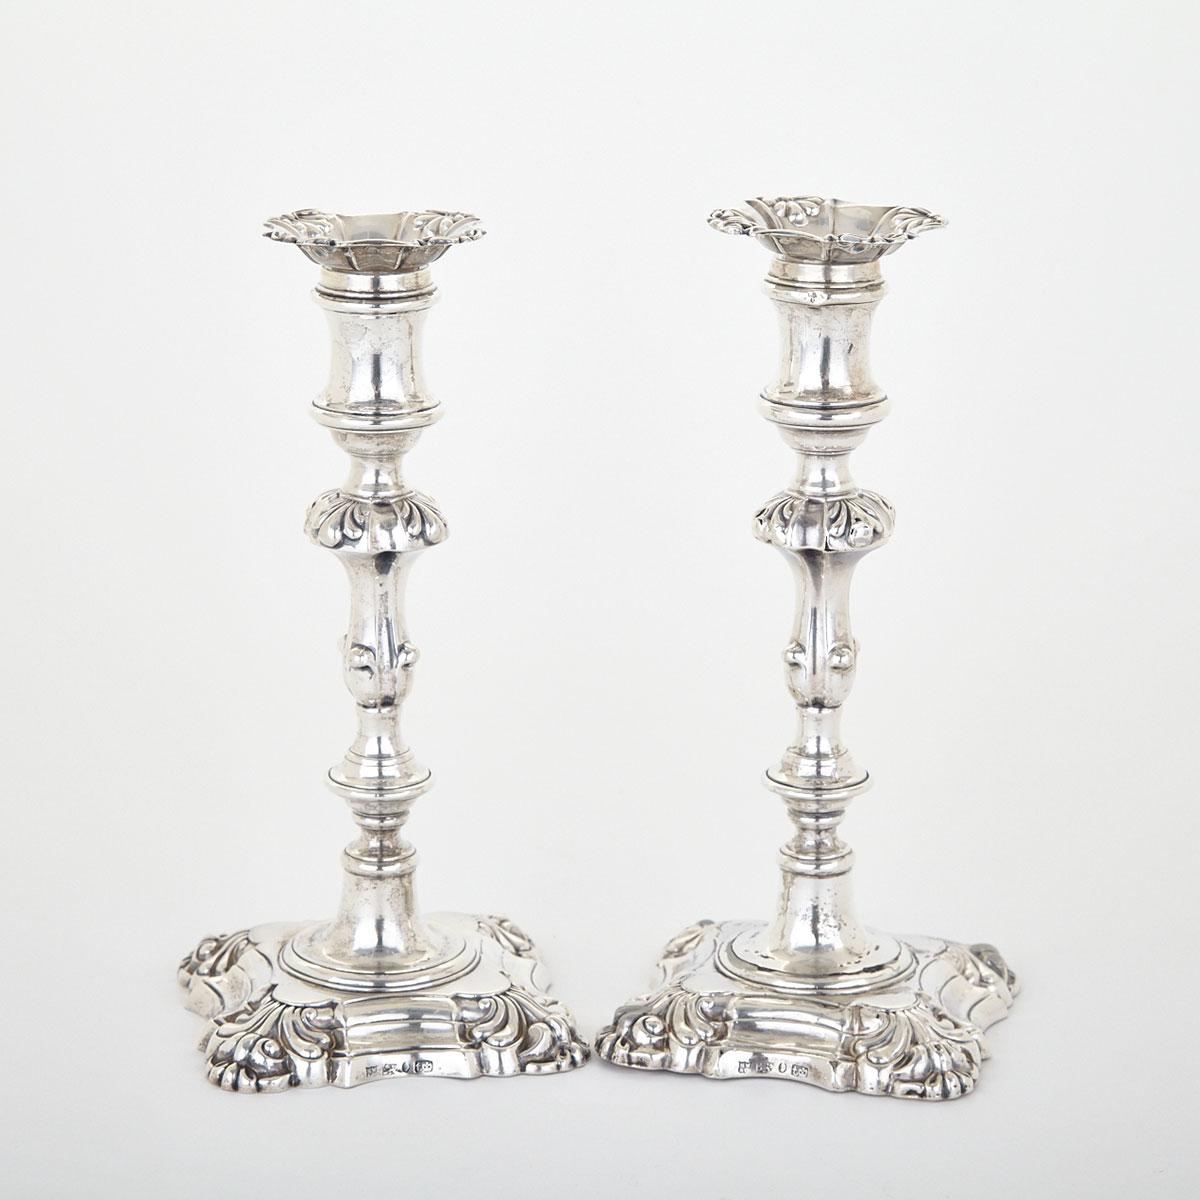 Pair of Victorian Silver Candlesticks, Henry Wilkinson & Co., Sheffield, 1839